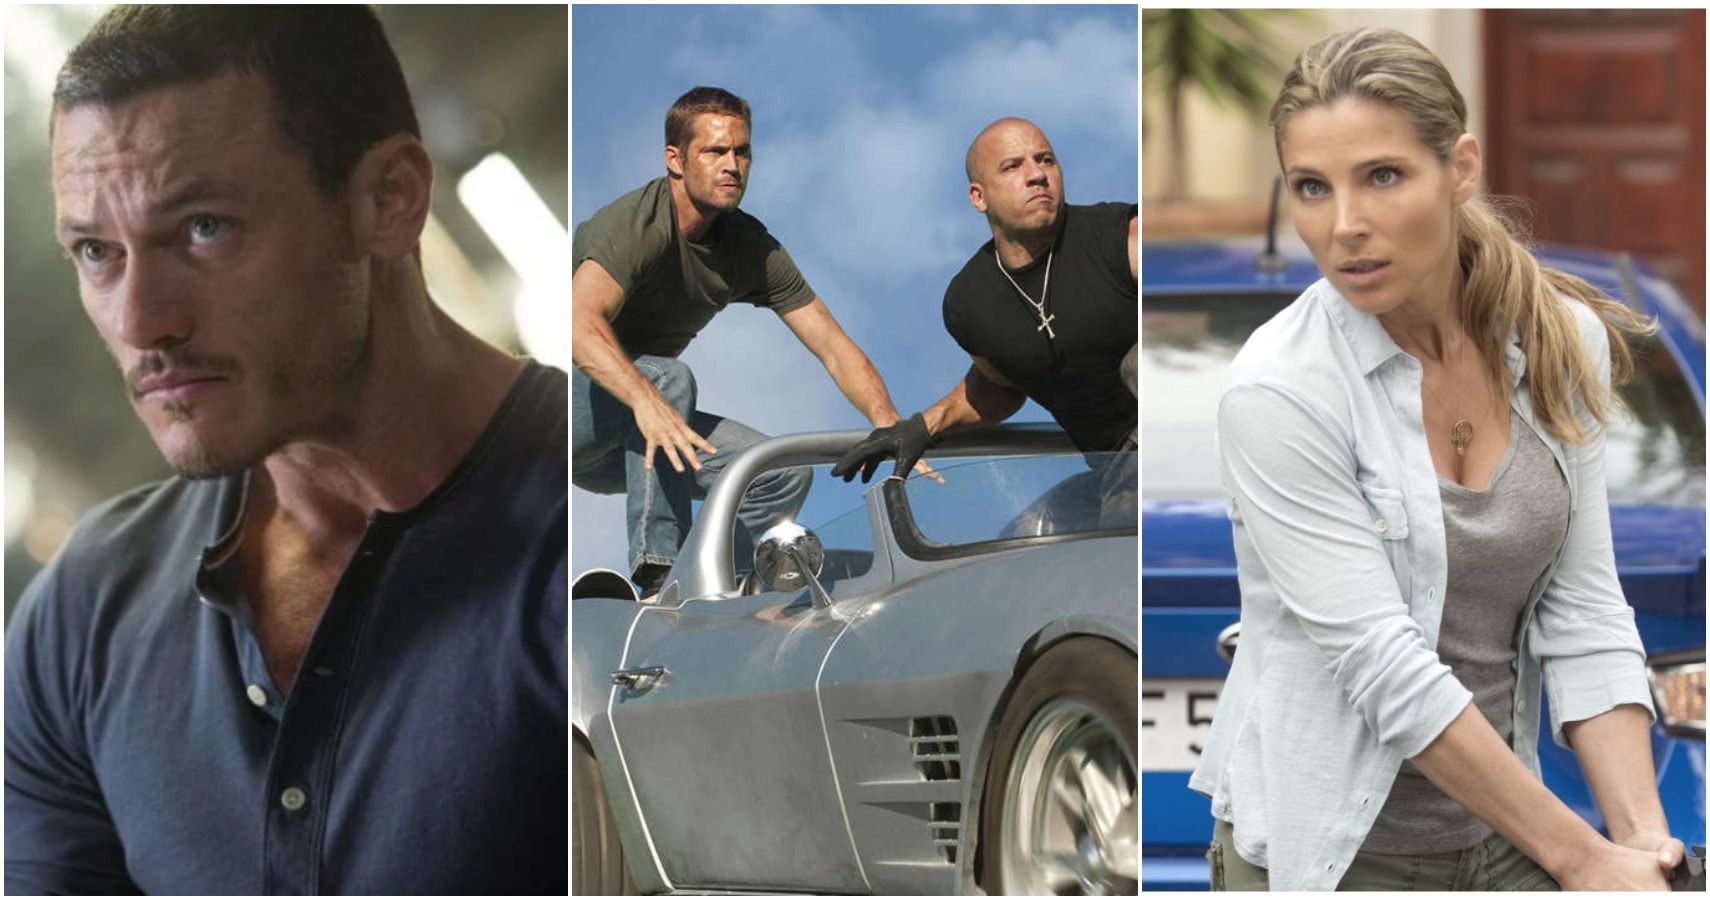 10 Plot Holes From The Fast And Furious Movies That Make No Sense Whatsoever